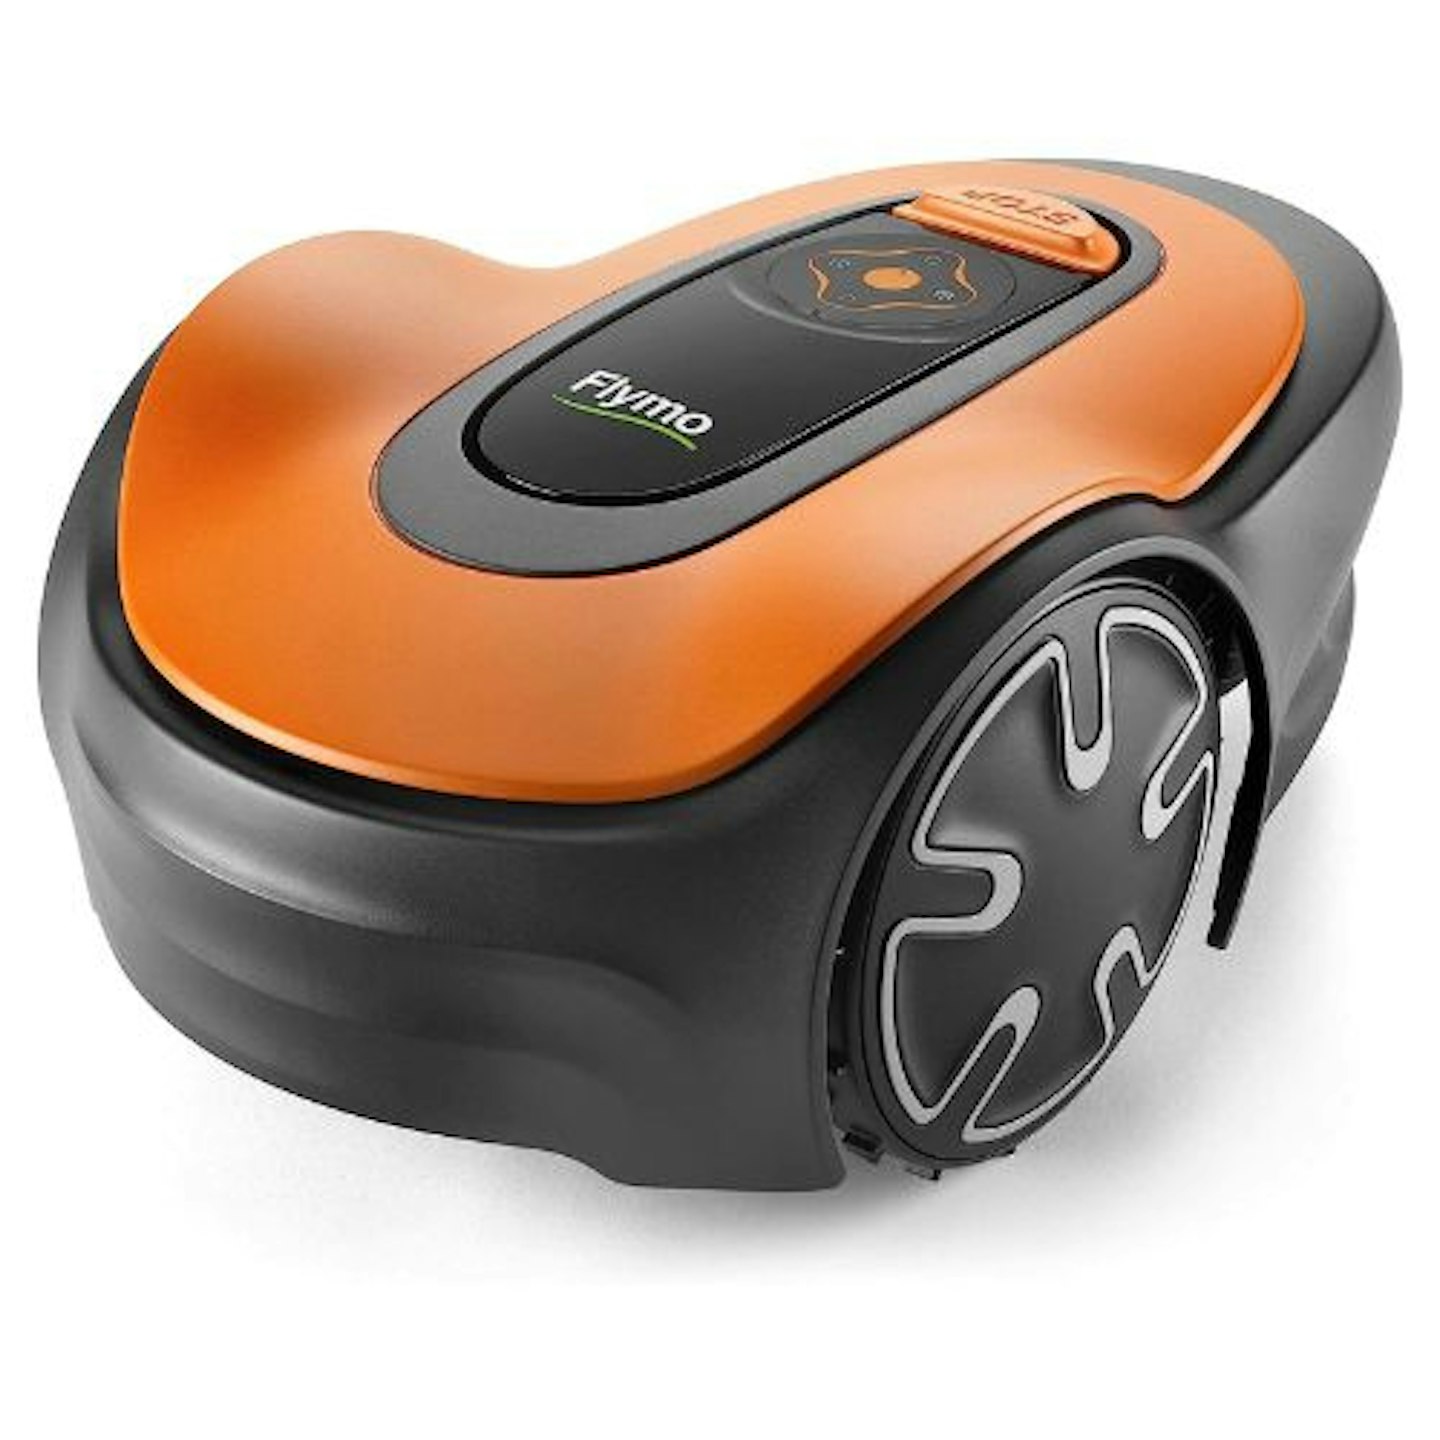 Flymo EasiLife 150 GO Robotic Lawn Mower - Cuts Up to 150 sq m, Ultra Quiet Mowing, Manicured Lawn, Bluetooth Application Control, Safety Sensors, Hose...